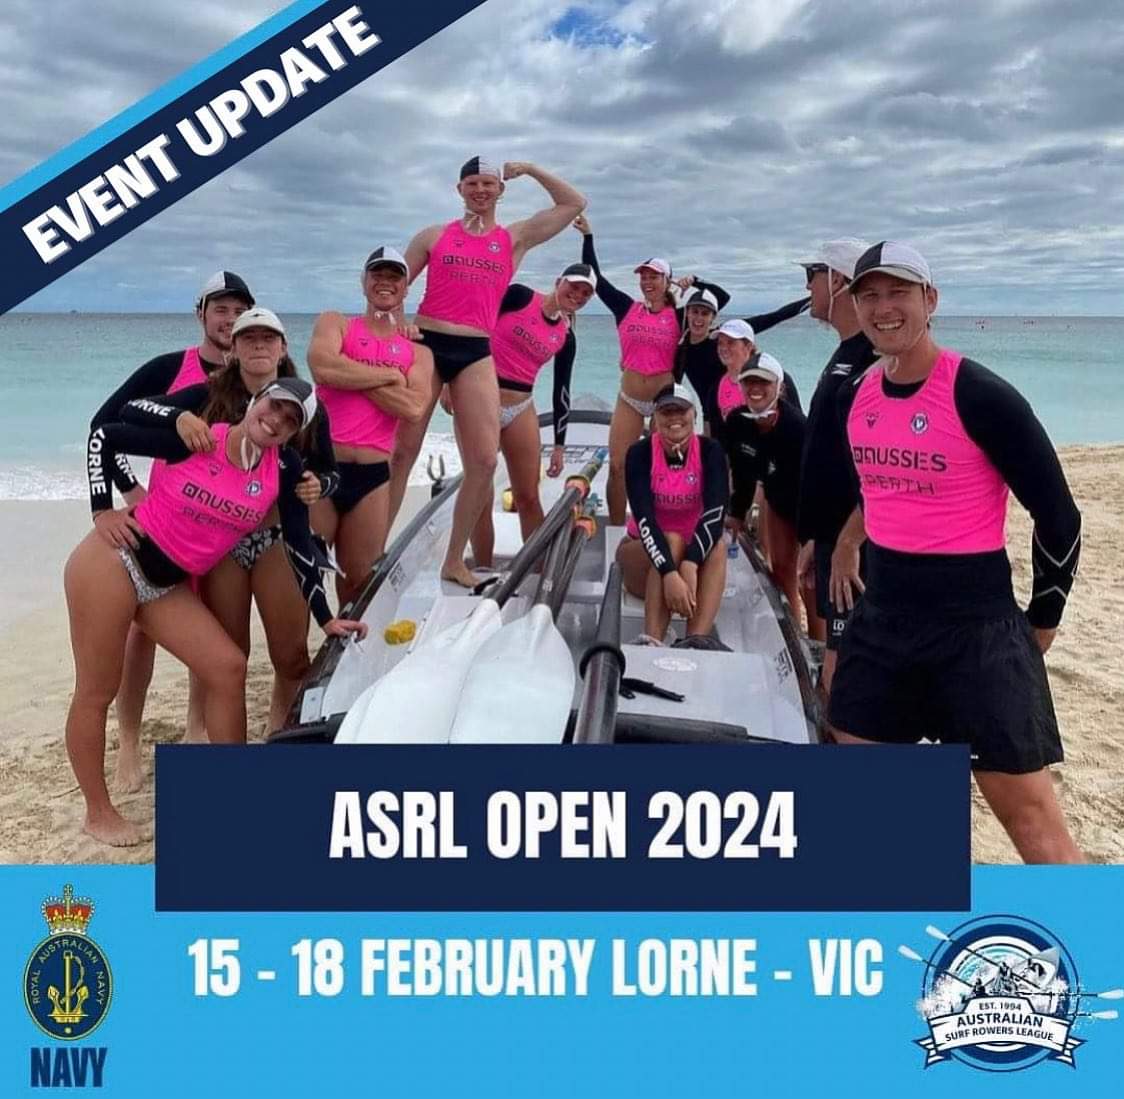 Early Bird Entries for the ASRL Open will be open from December 1st! Don’t miss